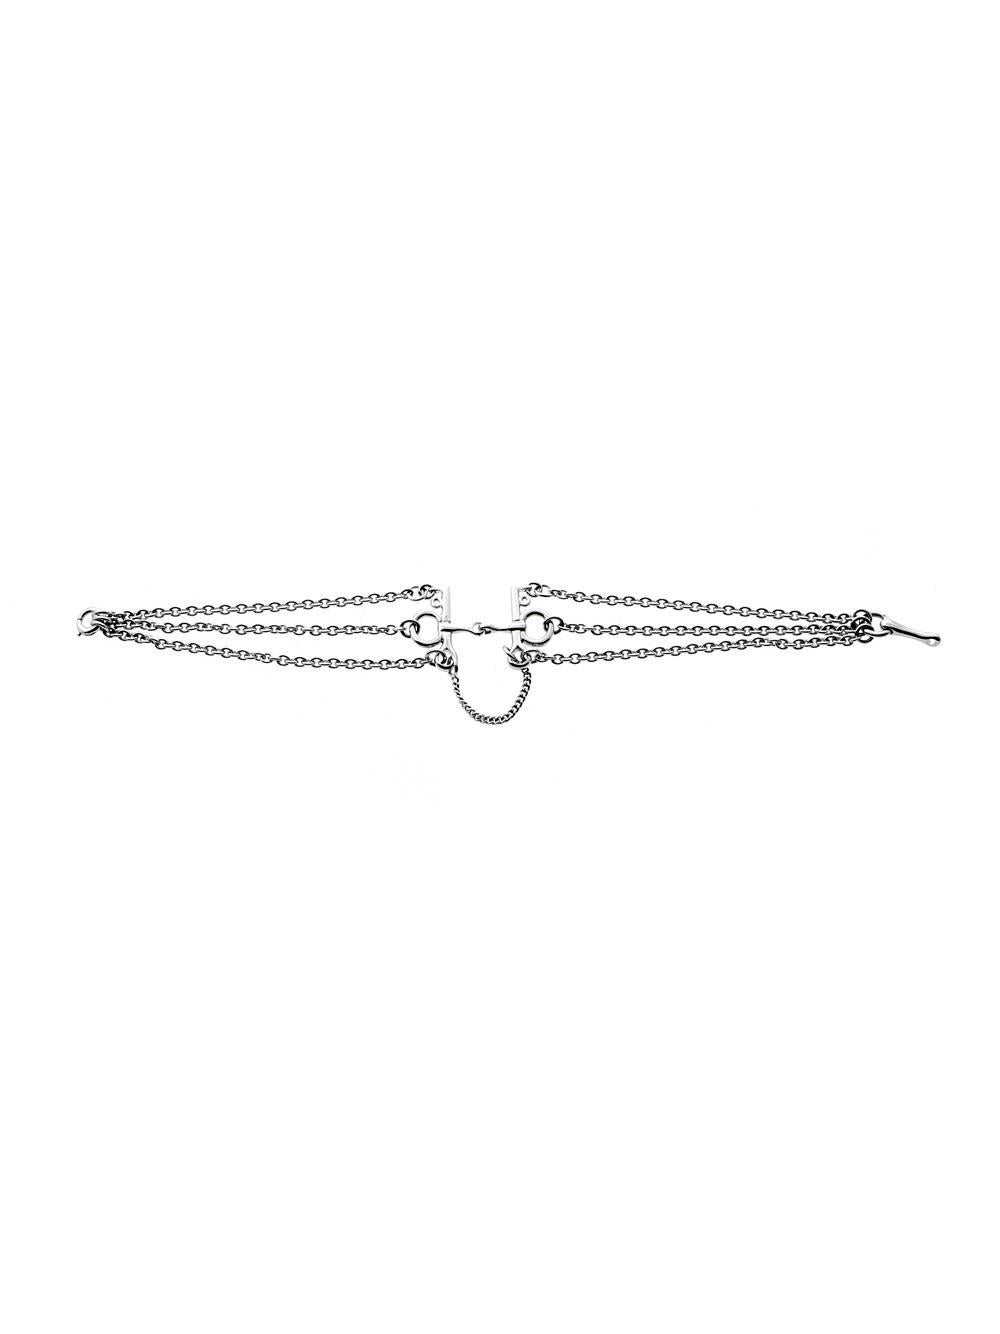 A chic chain link bracelet by Hermes composed of 18k white gold featuring the brands signature H logo at the forefront. The bracelet has a length of 6.3